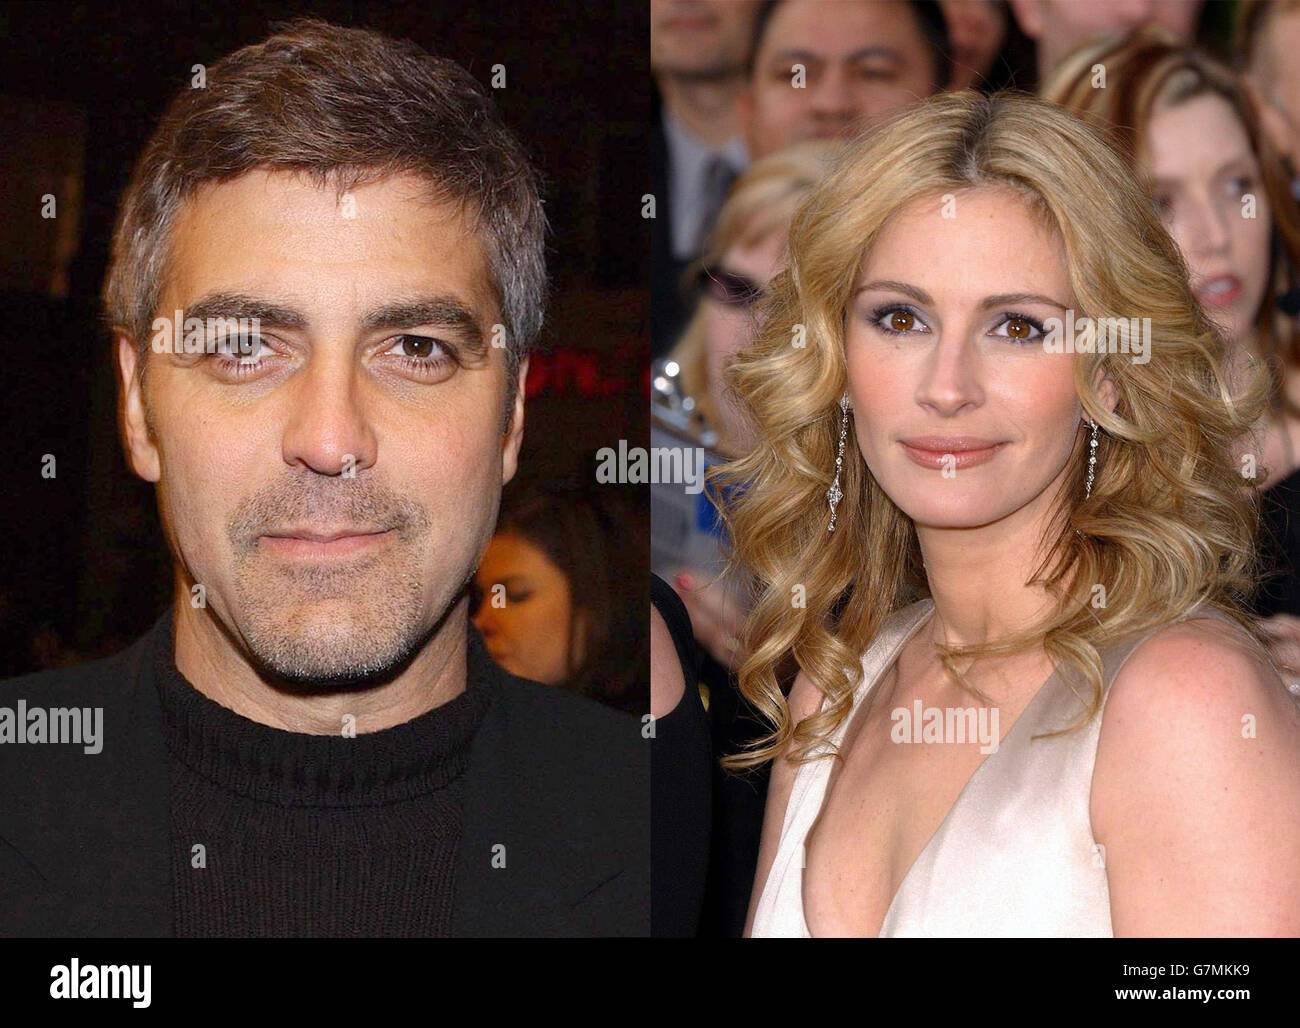 George Clooney and Julia Roberts. George Clooney and Julia Roberts, who have been voted the most beautiful people on the planet. Stock Photo